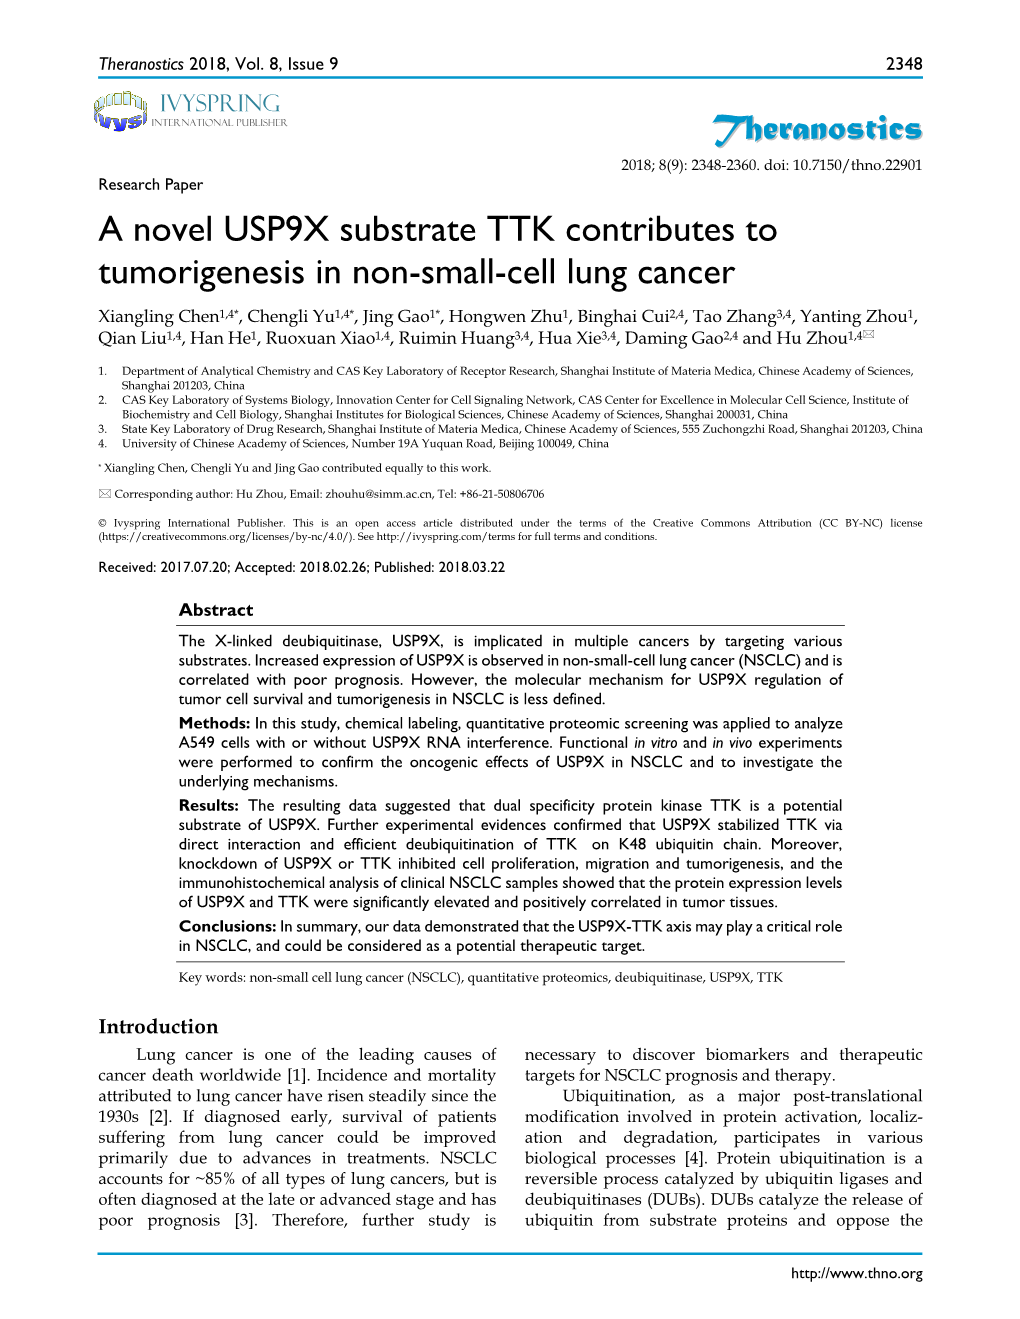 Theranostics a Novel USP9X Substrate TTK Contributes to Tumorigenesis in Non-Small-Cell Lung Cancer